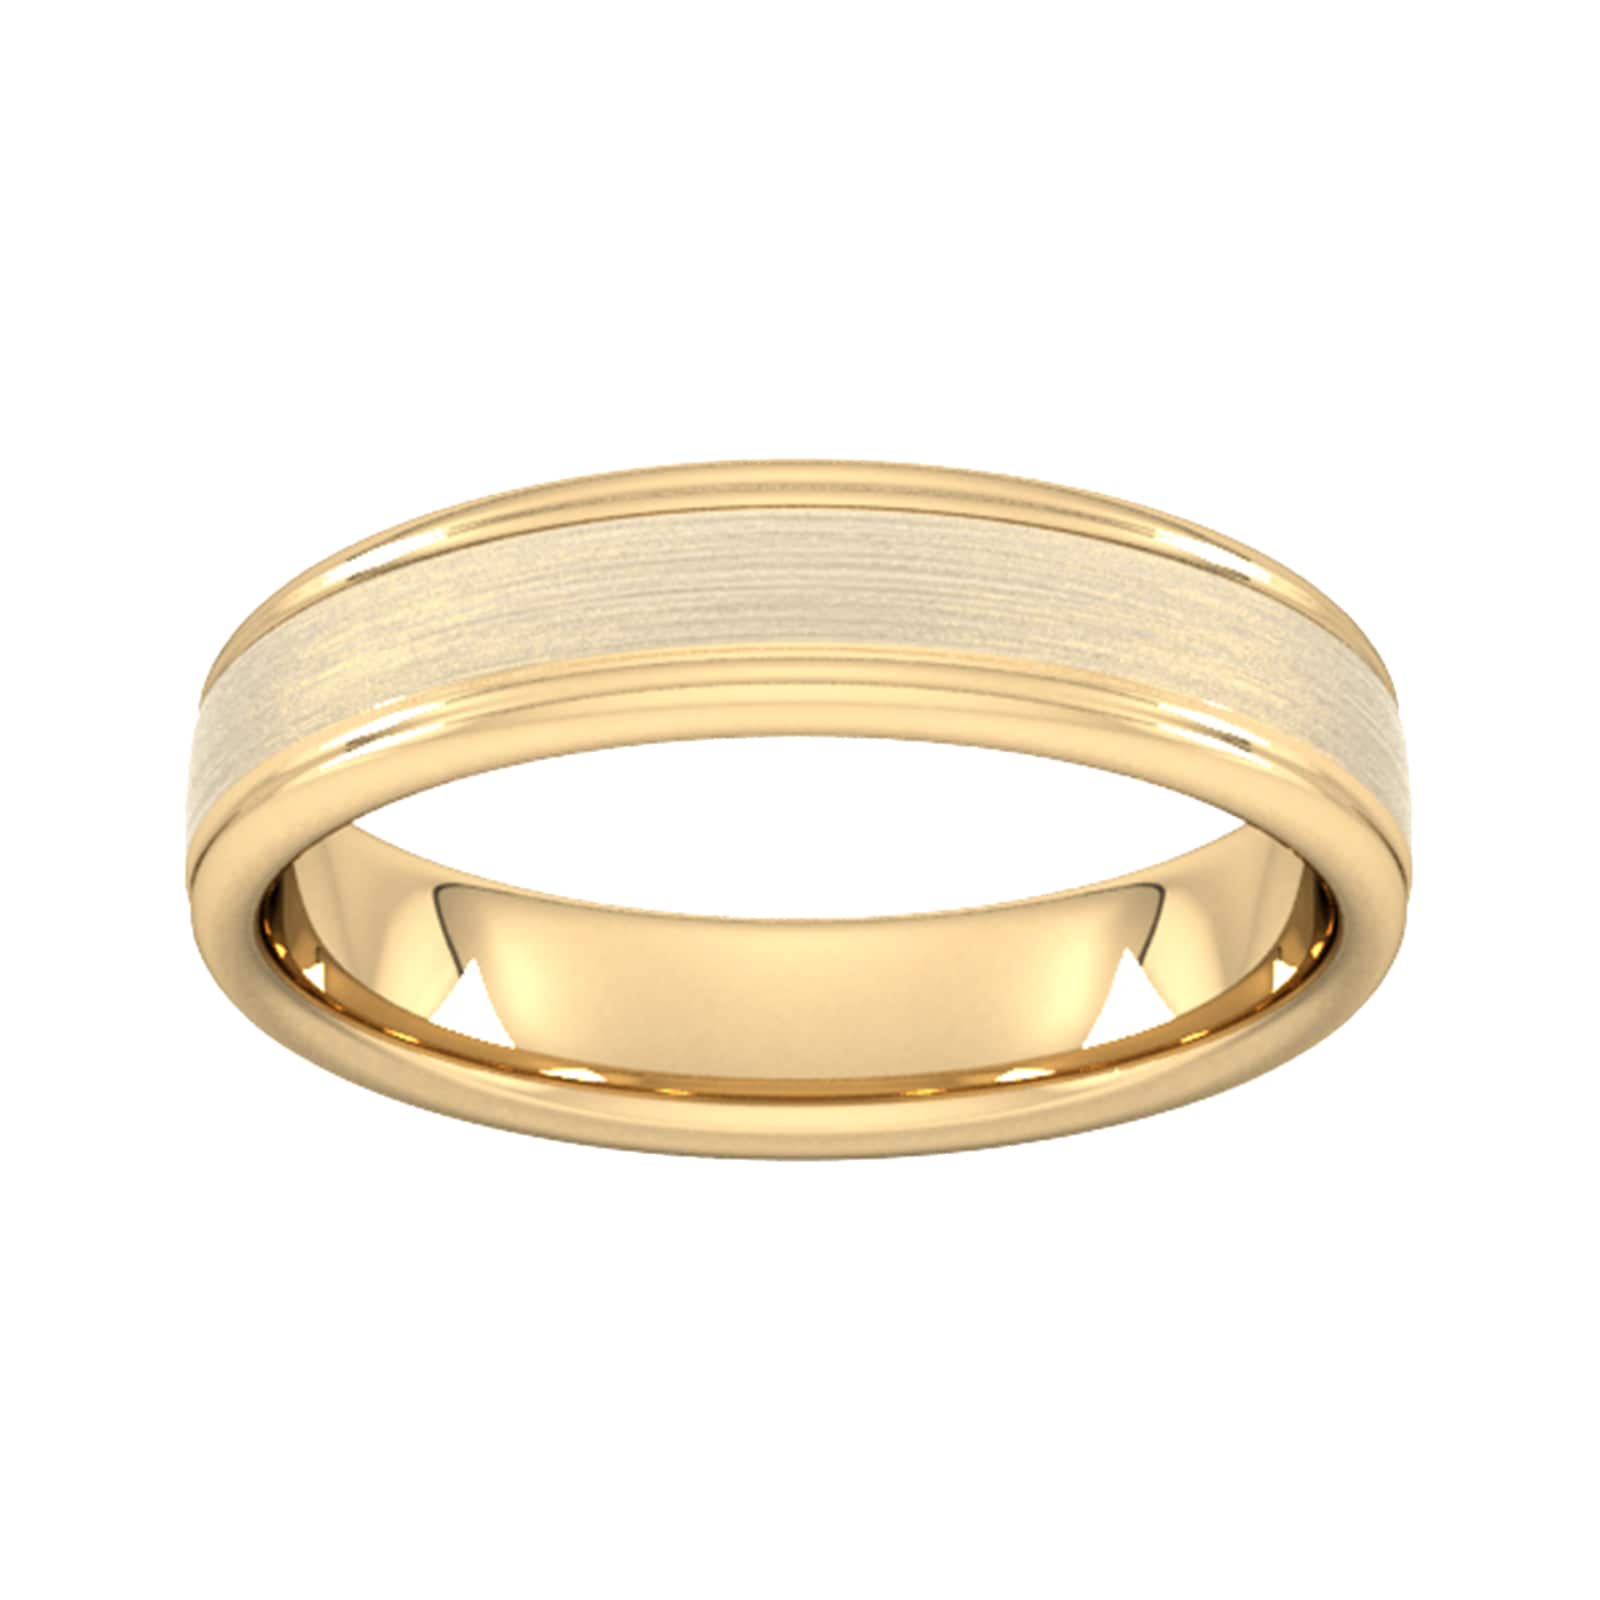 5mm Slight Court Standard Matt Centre With Grooves Wedding Ring In 9 Carat Yellow Gold - Ring Size O